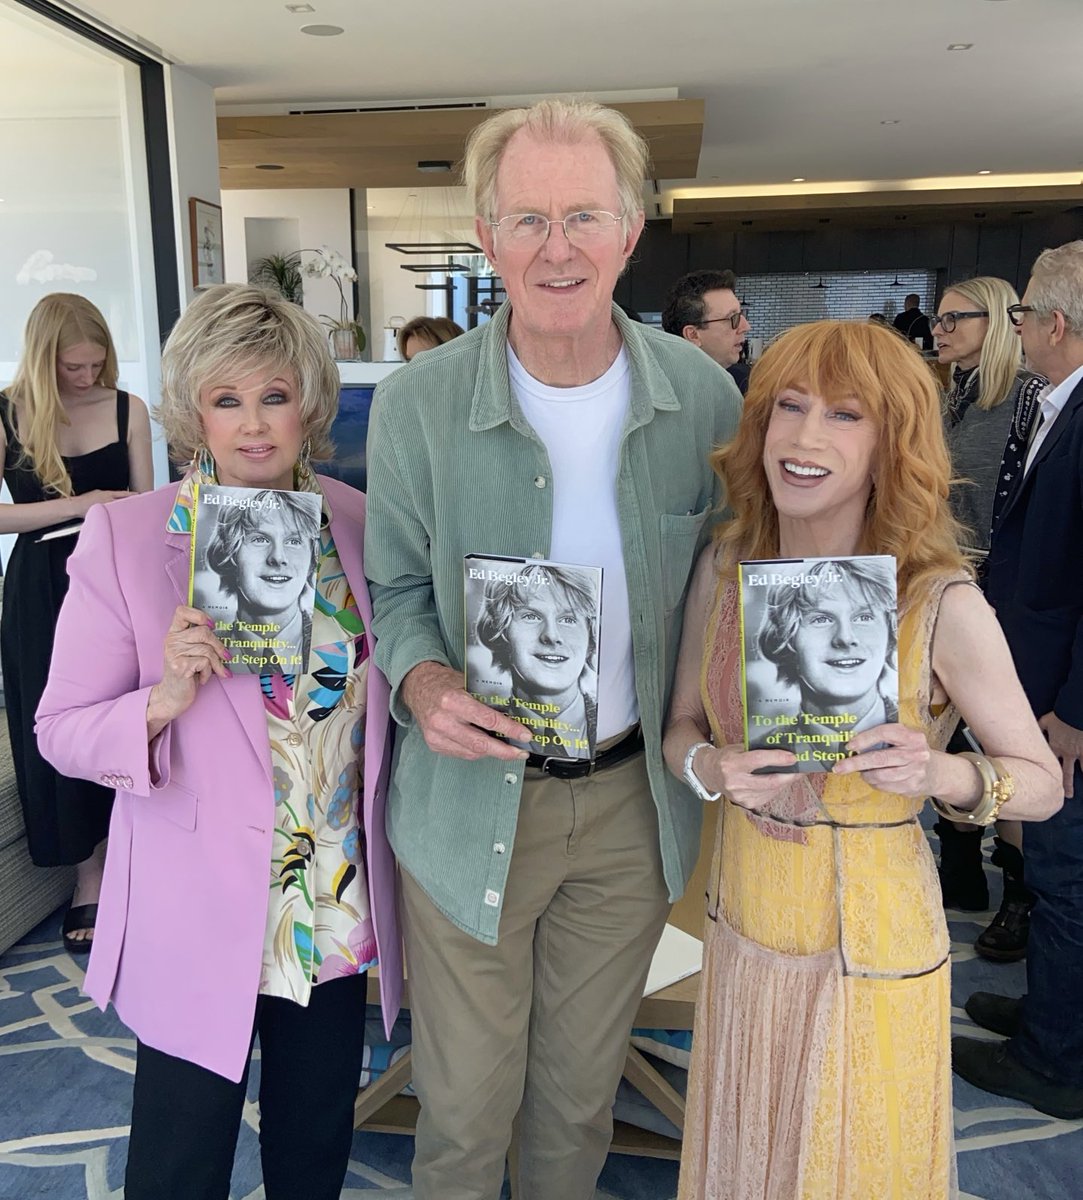 #OnMyWalk to fabulous afternoon at a ⁦@kathygriffin⁩ salon luncheon featuring my old friend ⁦⁦@edbegleyjr⁩ . Ed has a wonderful new memoir out that is so funny & touching at the same time. Get “To The Temple Of Tranquility…And Step On It”💗🎉🌷🥰💗🦋💗🎉💗🌷💗🥰